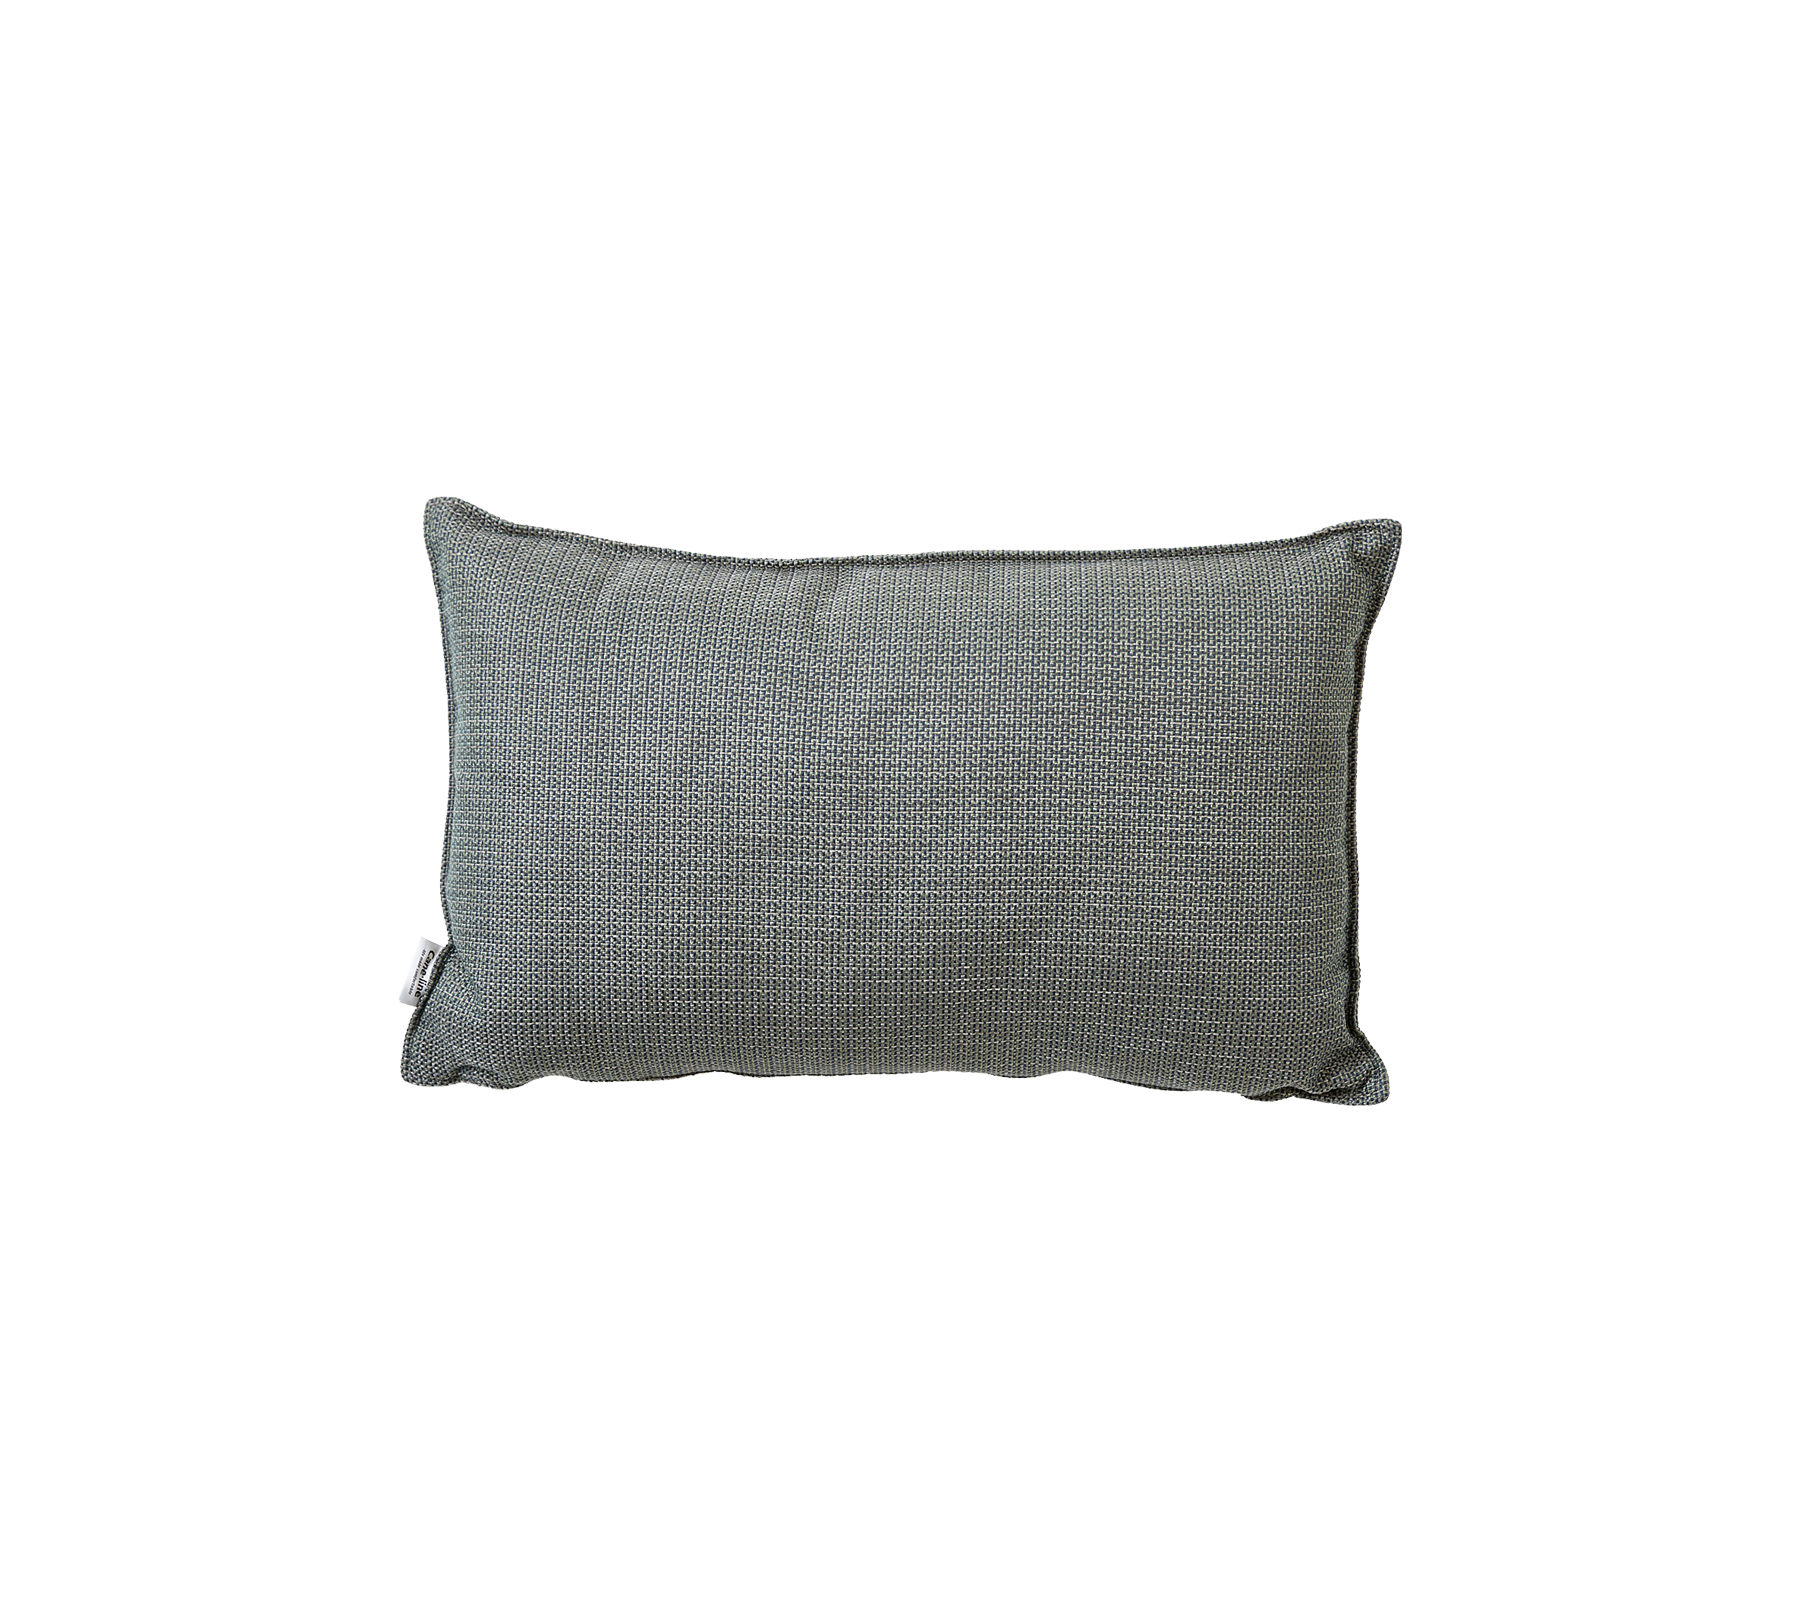 Cane-Line - Link scatter cushion, 32x52x12 cm